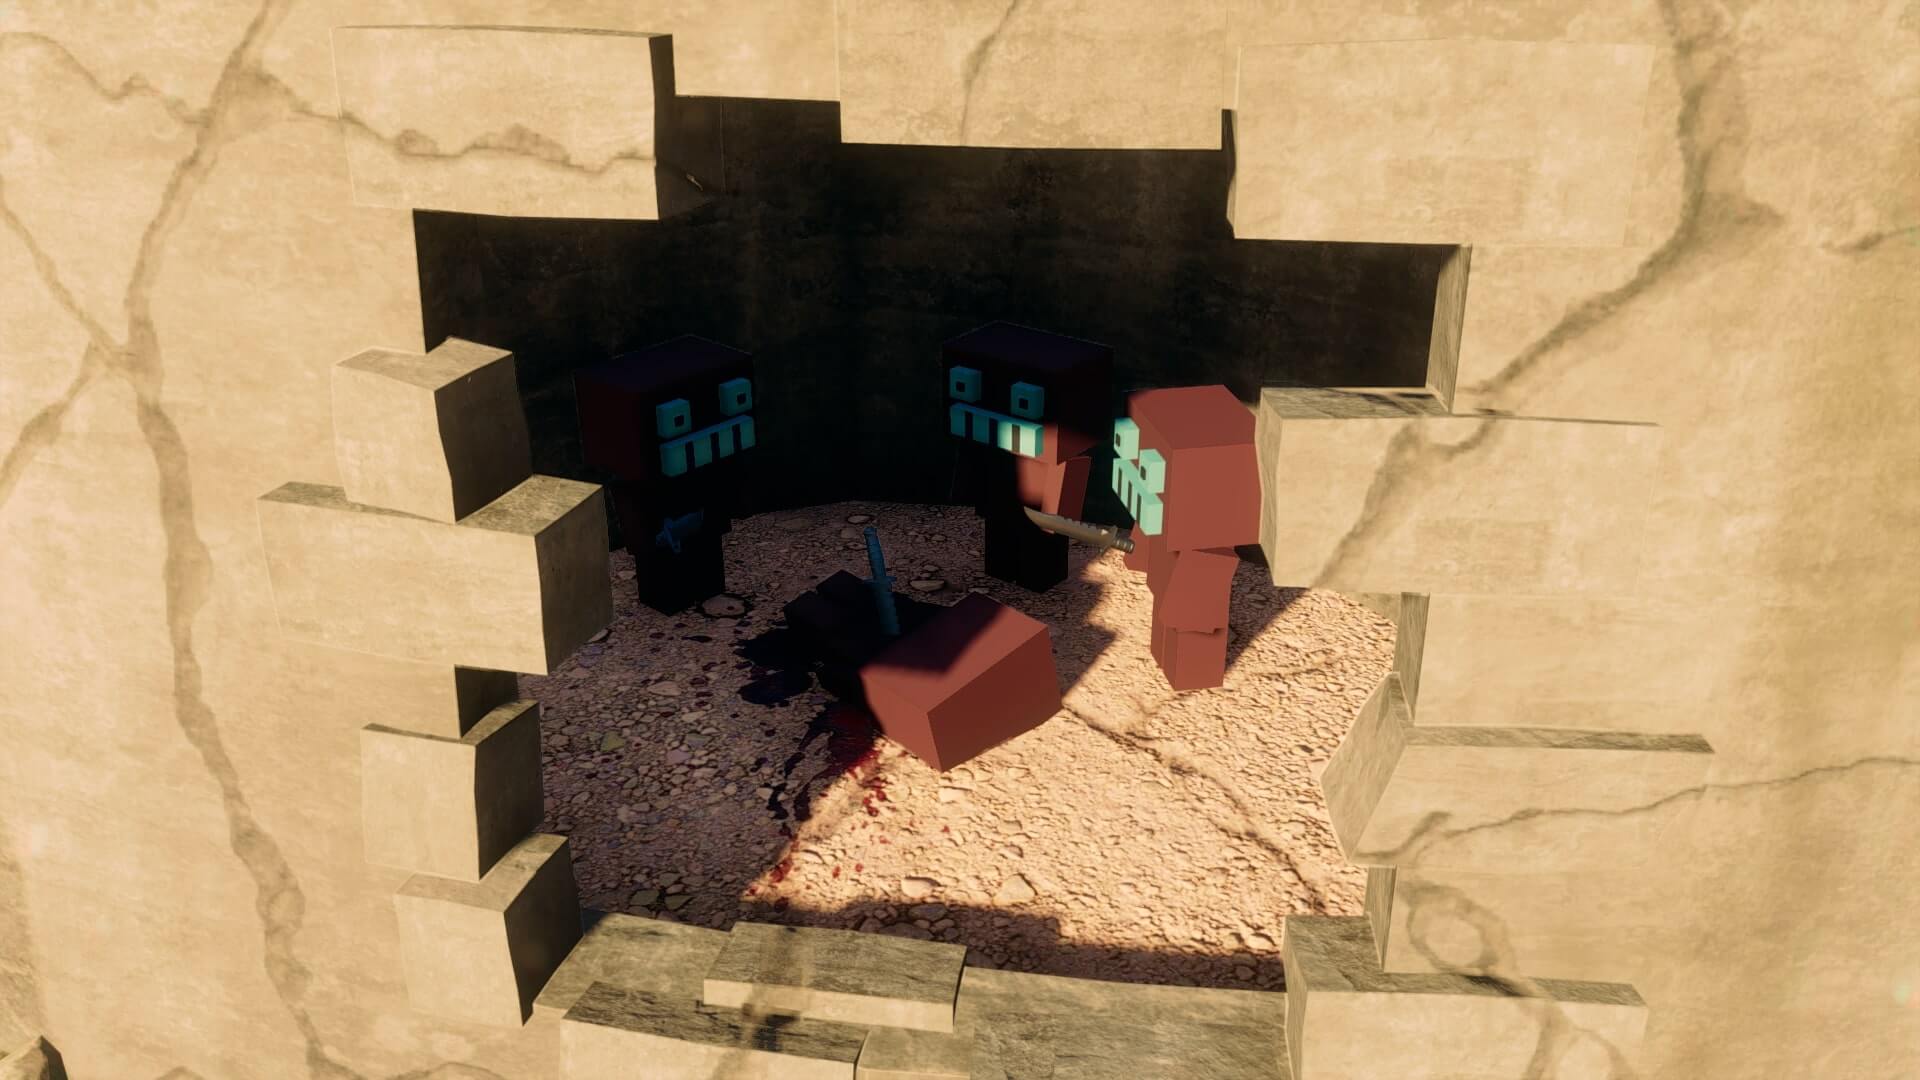 A breakable wall that is a reference to Minecraft